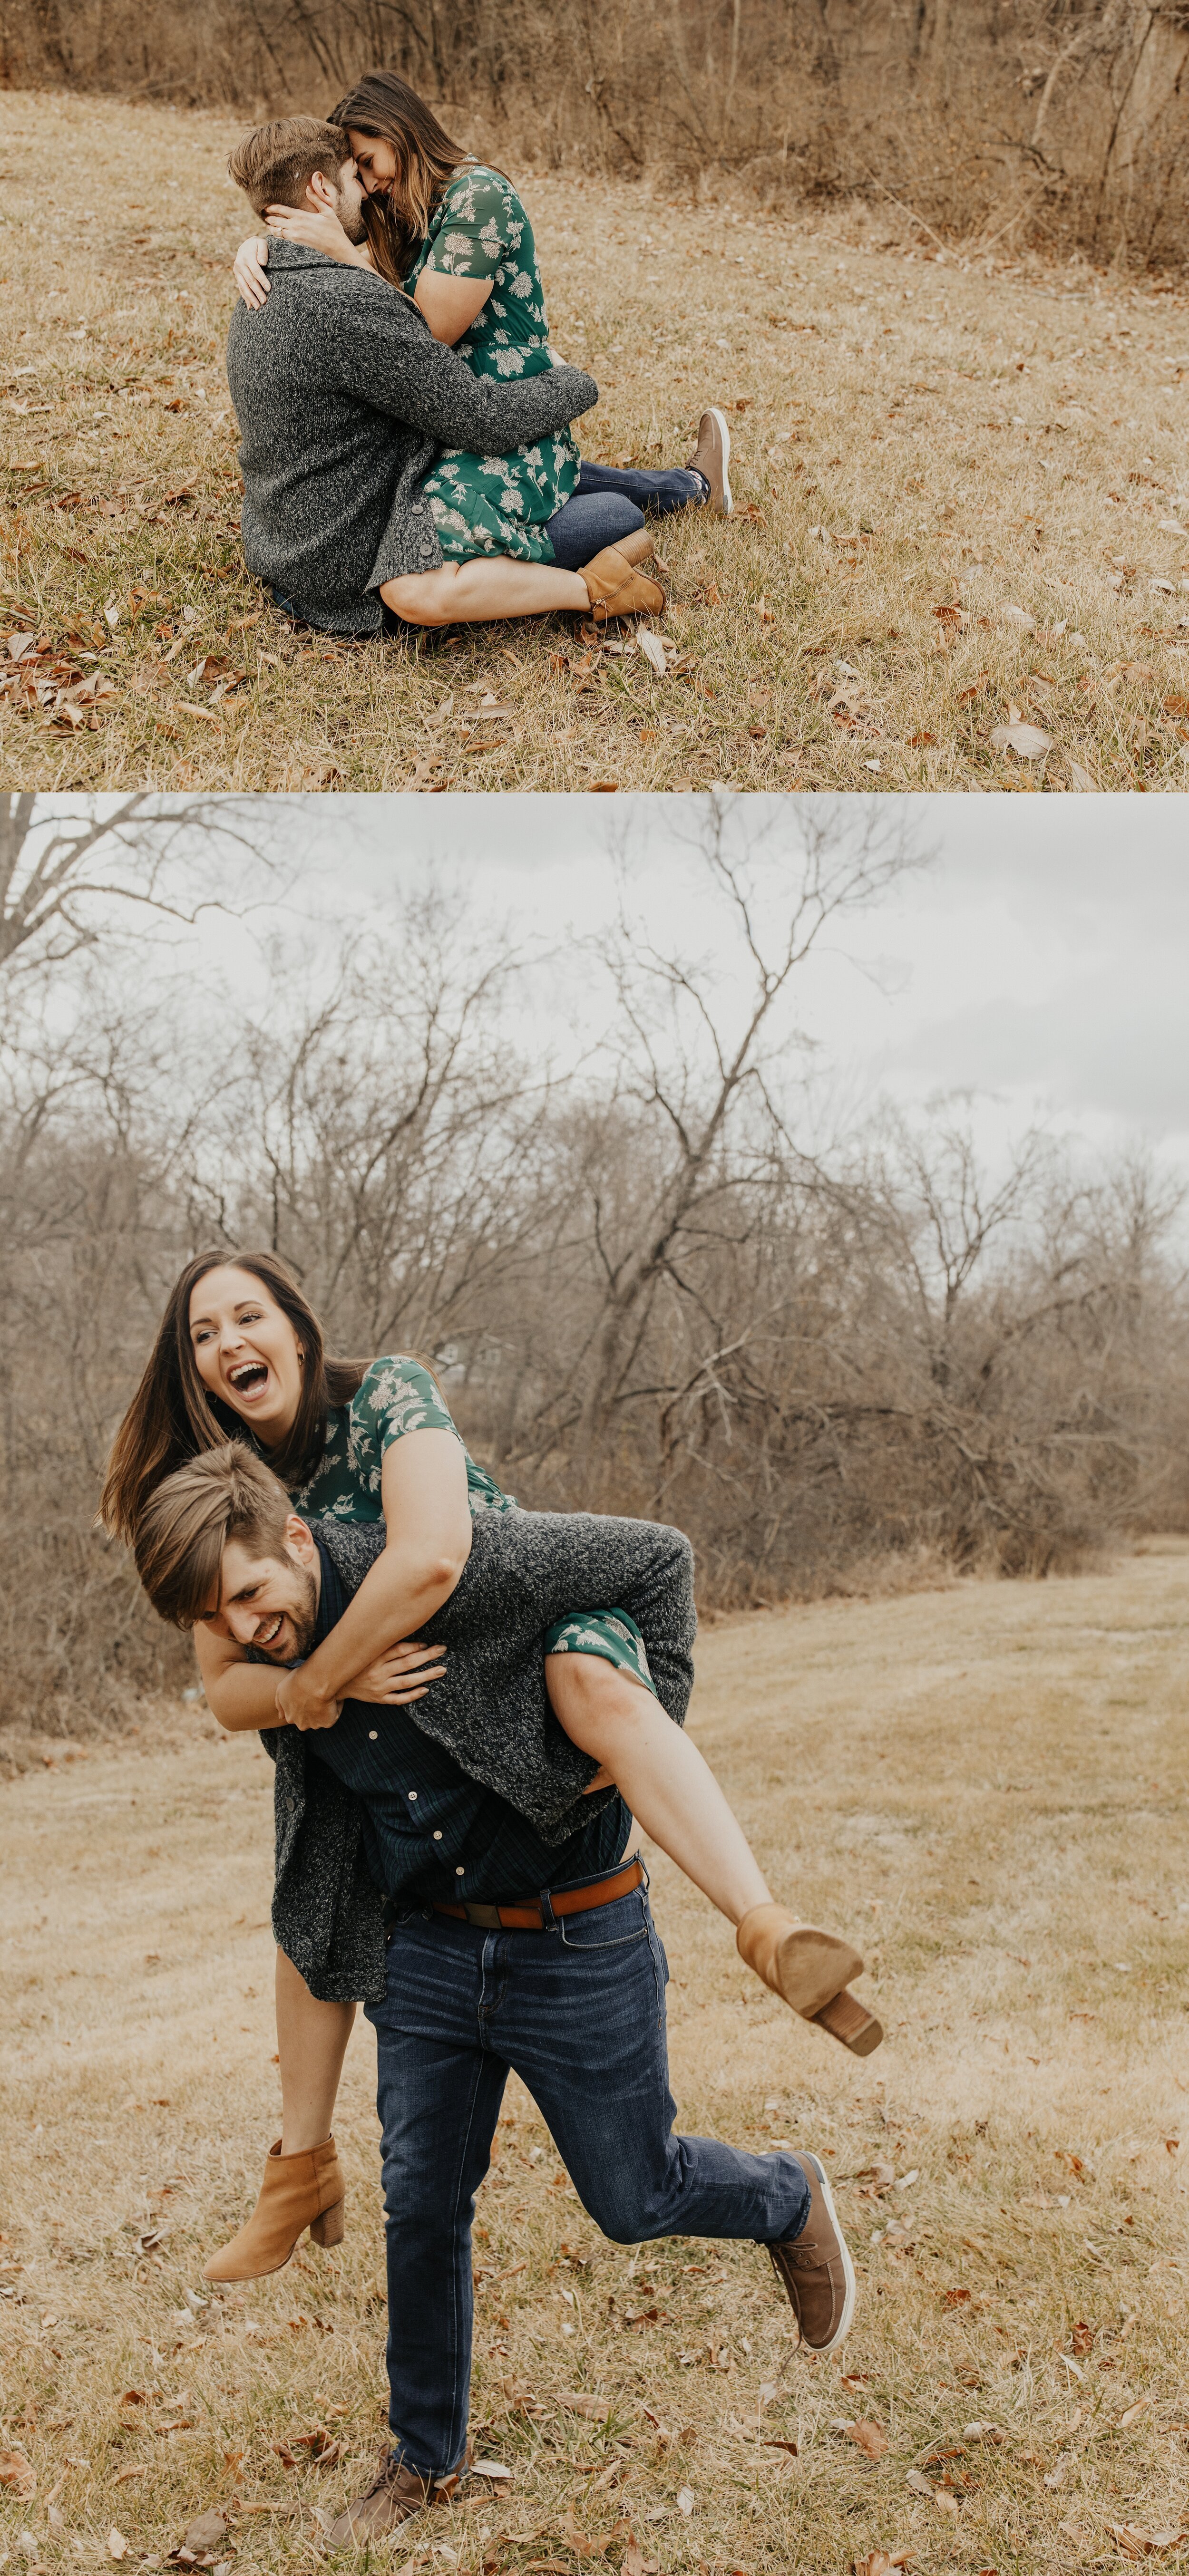 jessika-christine-photography-in+home-engagement-couples-cozy-adventurous-session (19).jpg